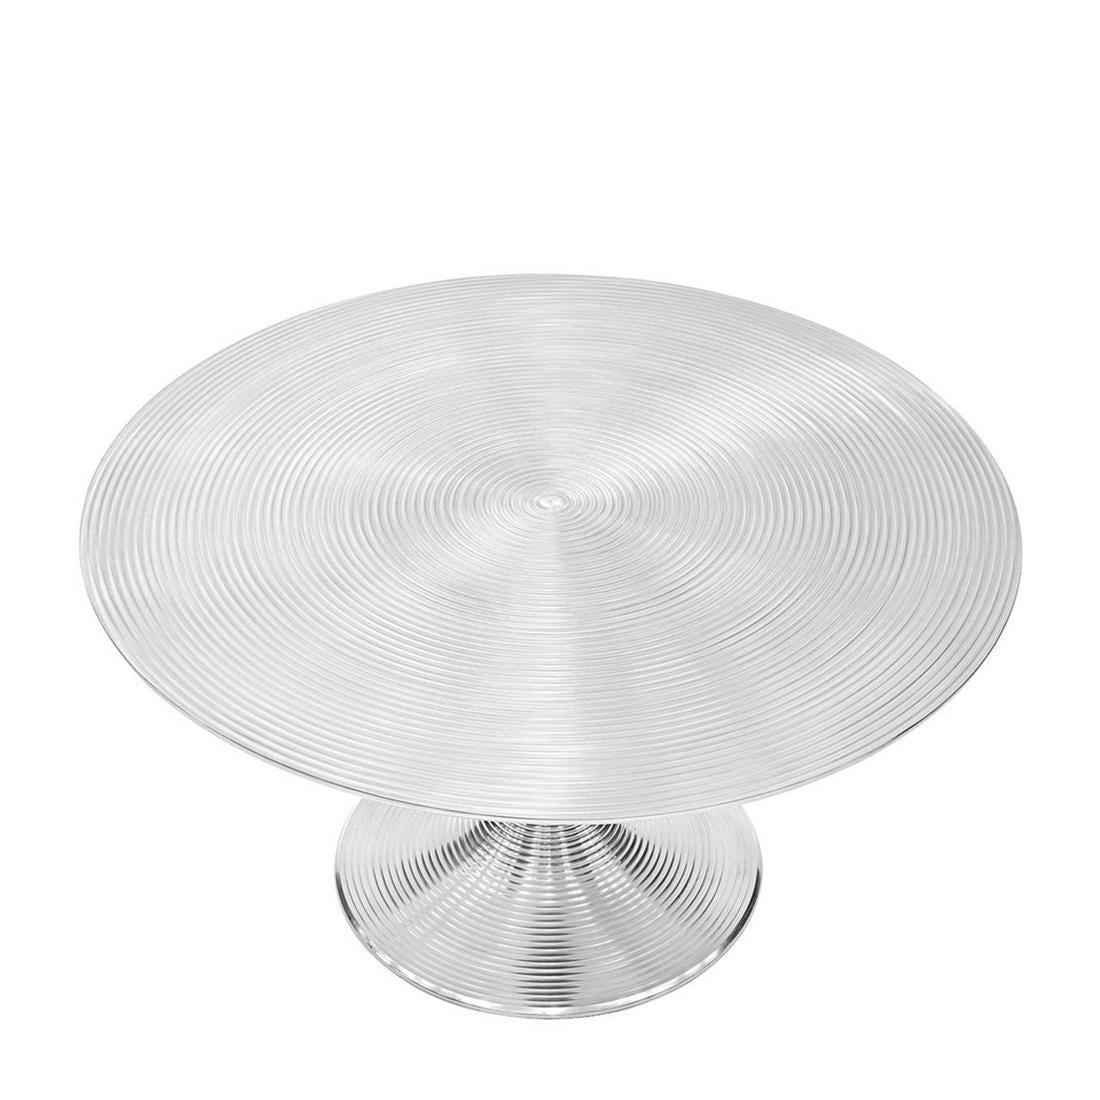 Coffee table Alu nickel in nickeled 
circled aluminium.
Also available in Alu nickel side table.